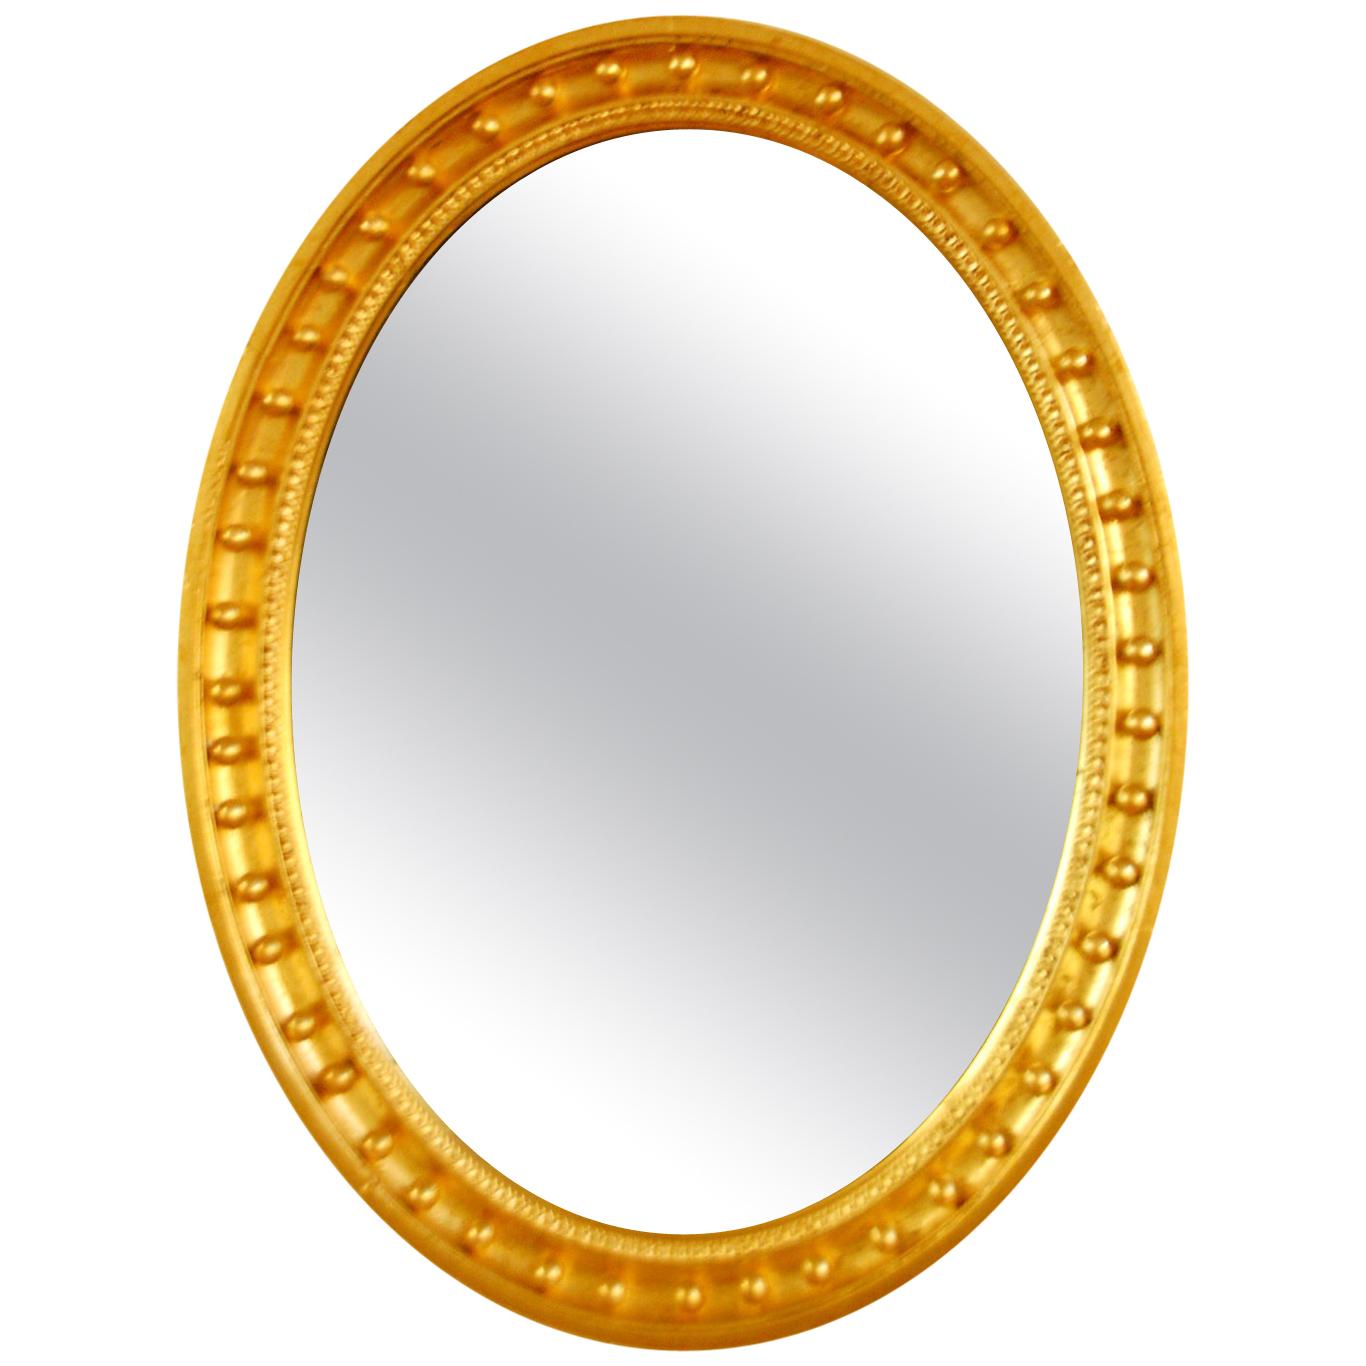 English Mid-19th Century Oval Gold Leaf Mirror with Balls